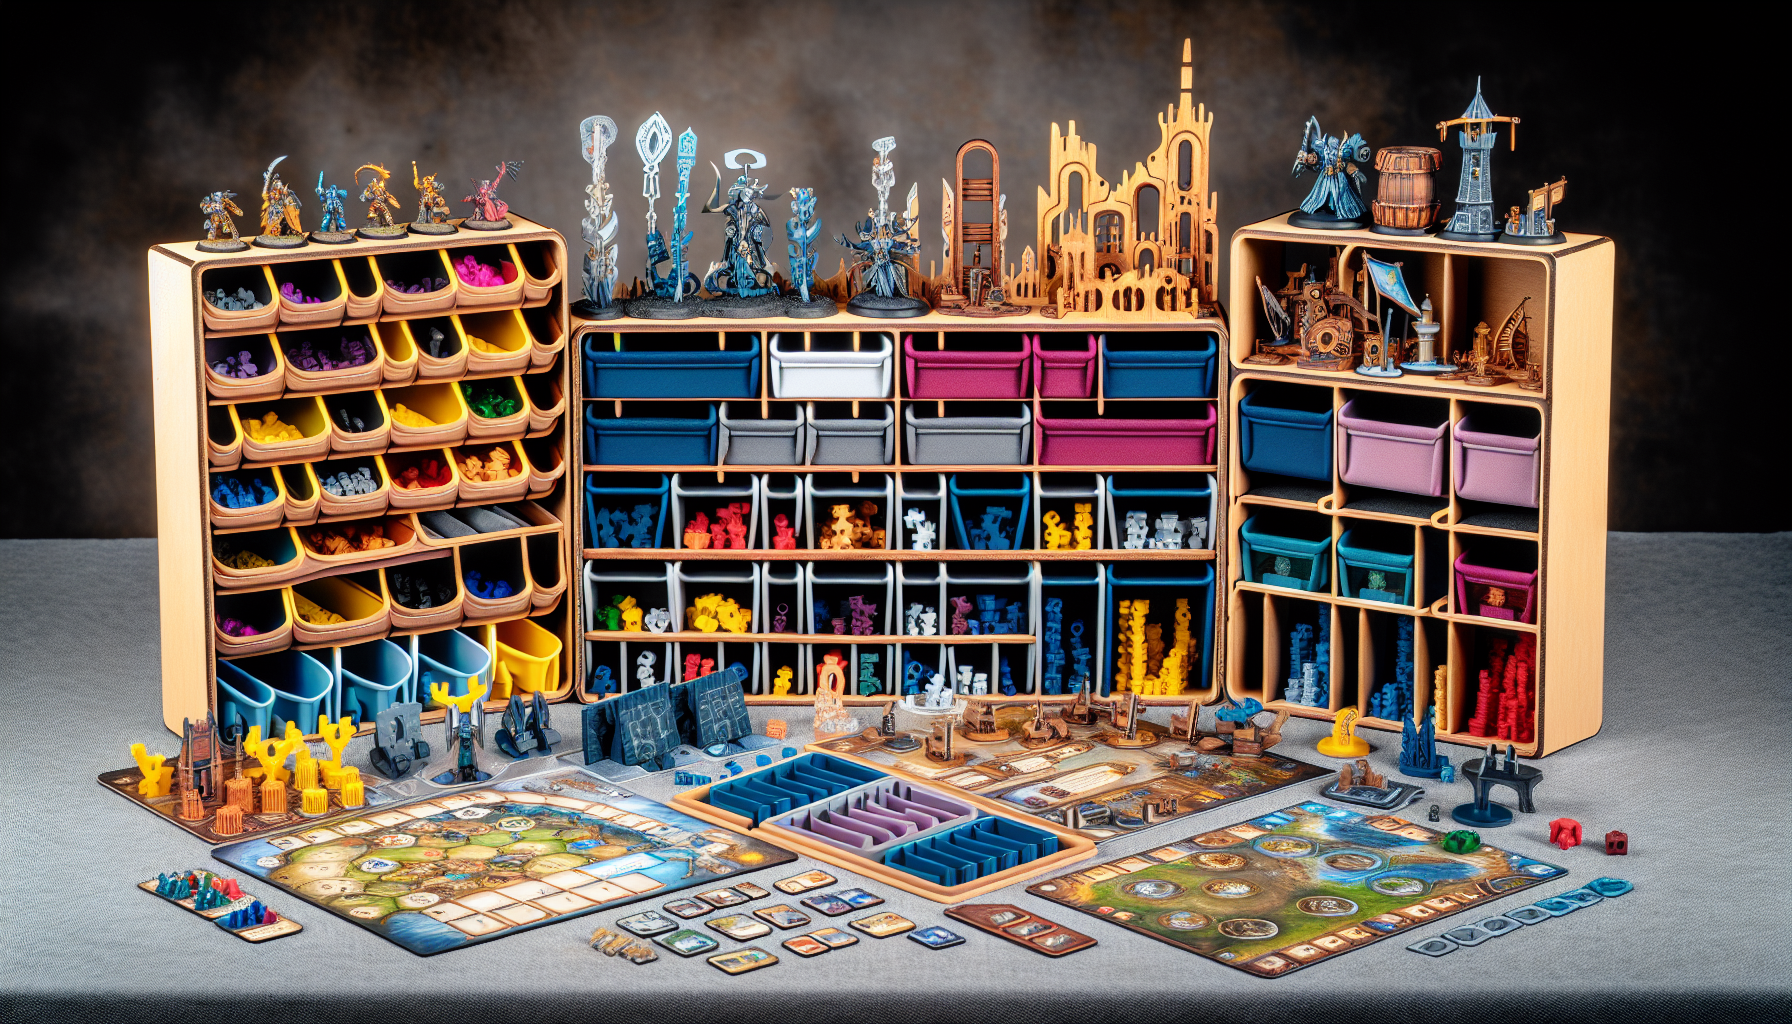 Various board game accessories including organizers, upgraded pieces, and immersive add-ons